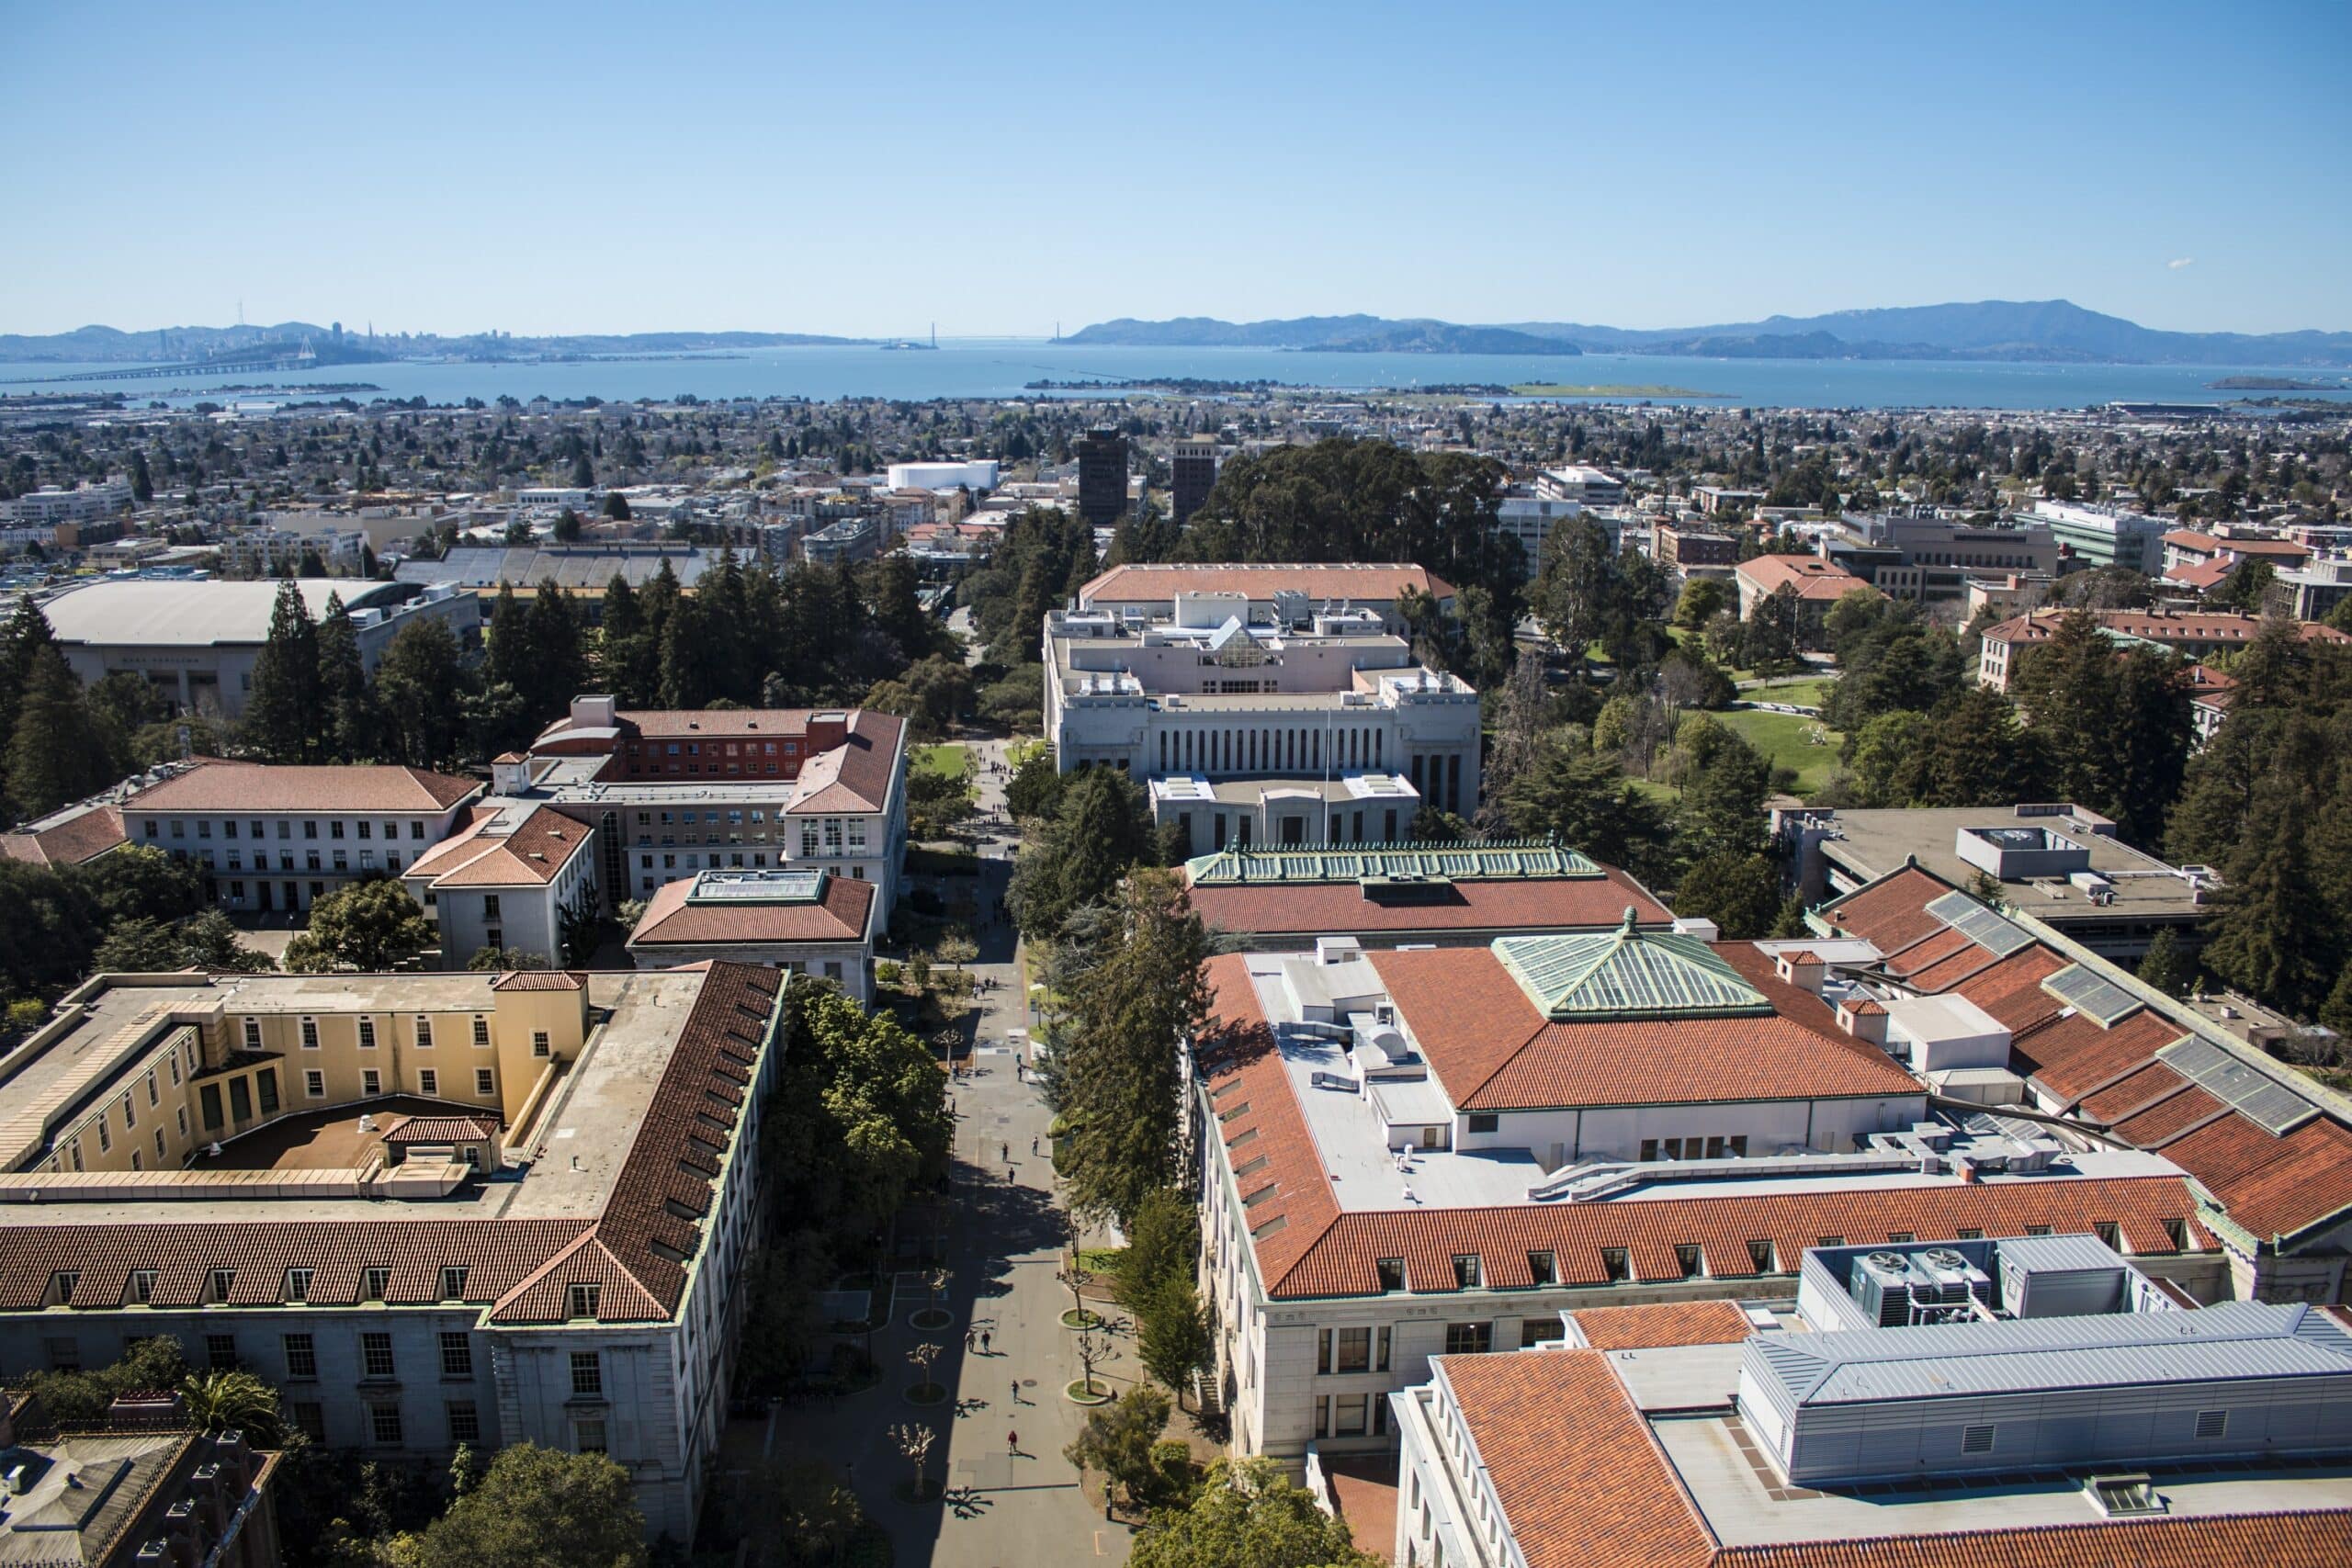 Uc Berkeley Will Remove Public Access To Online Content Cielo24